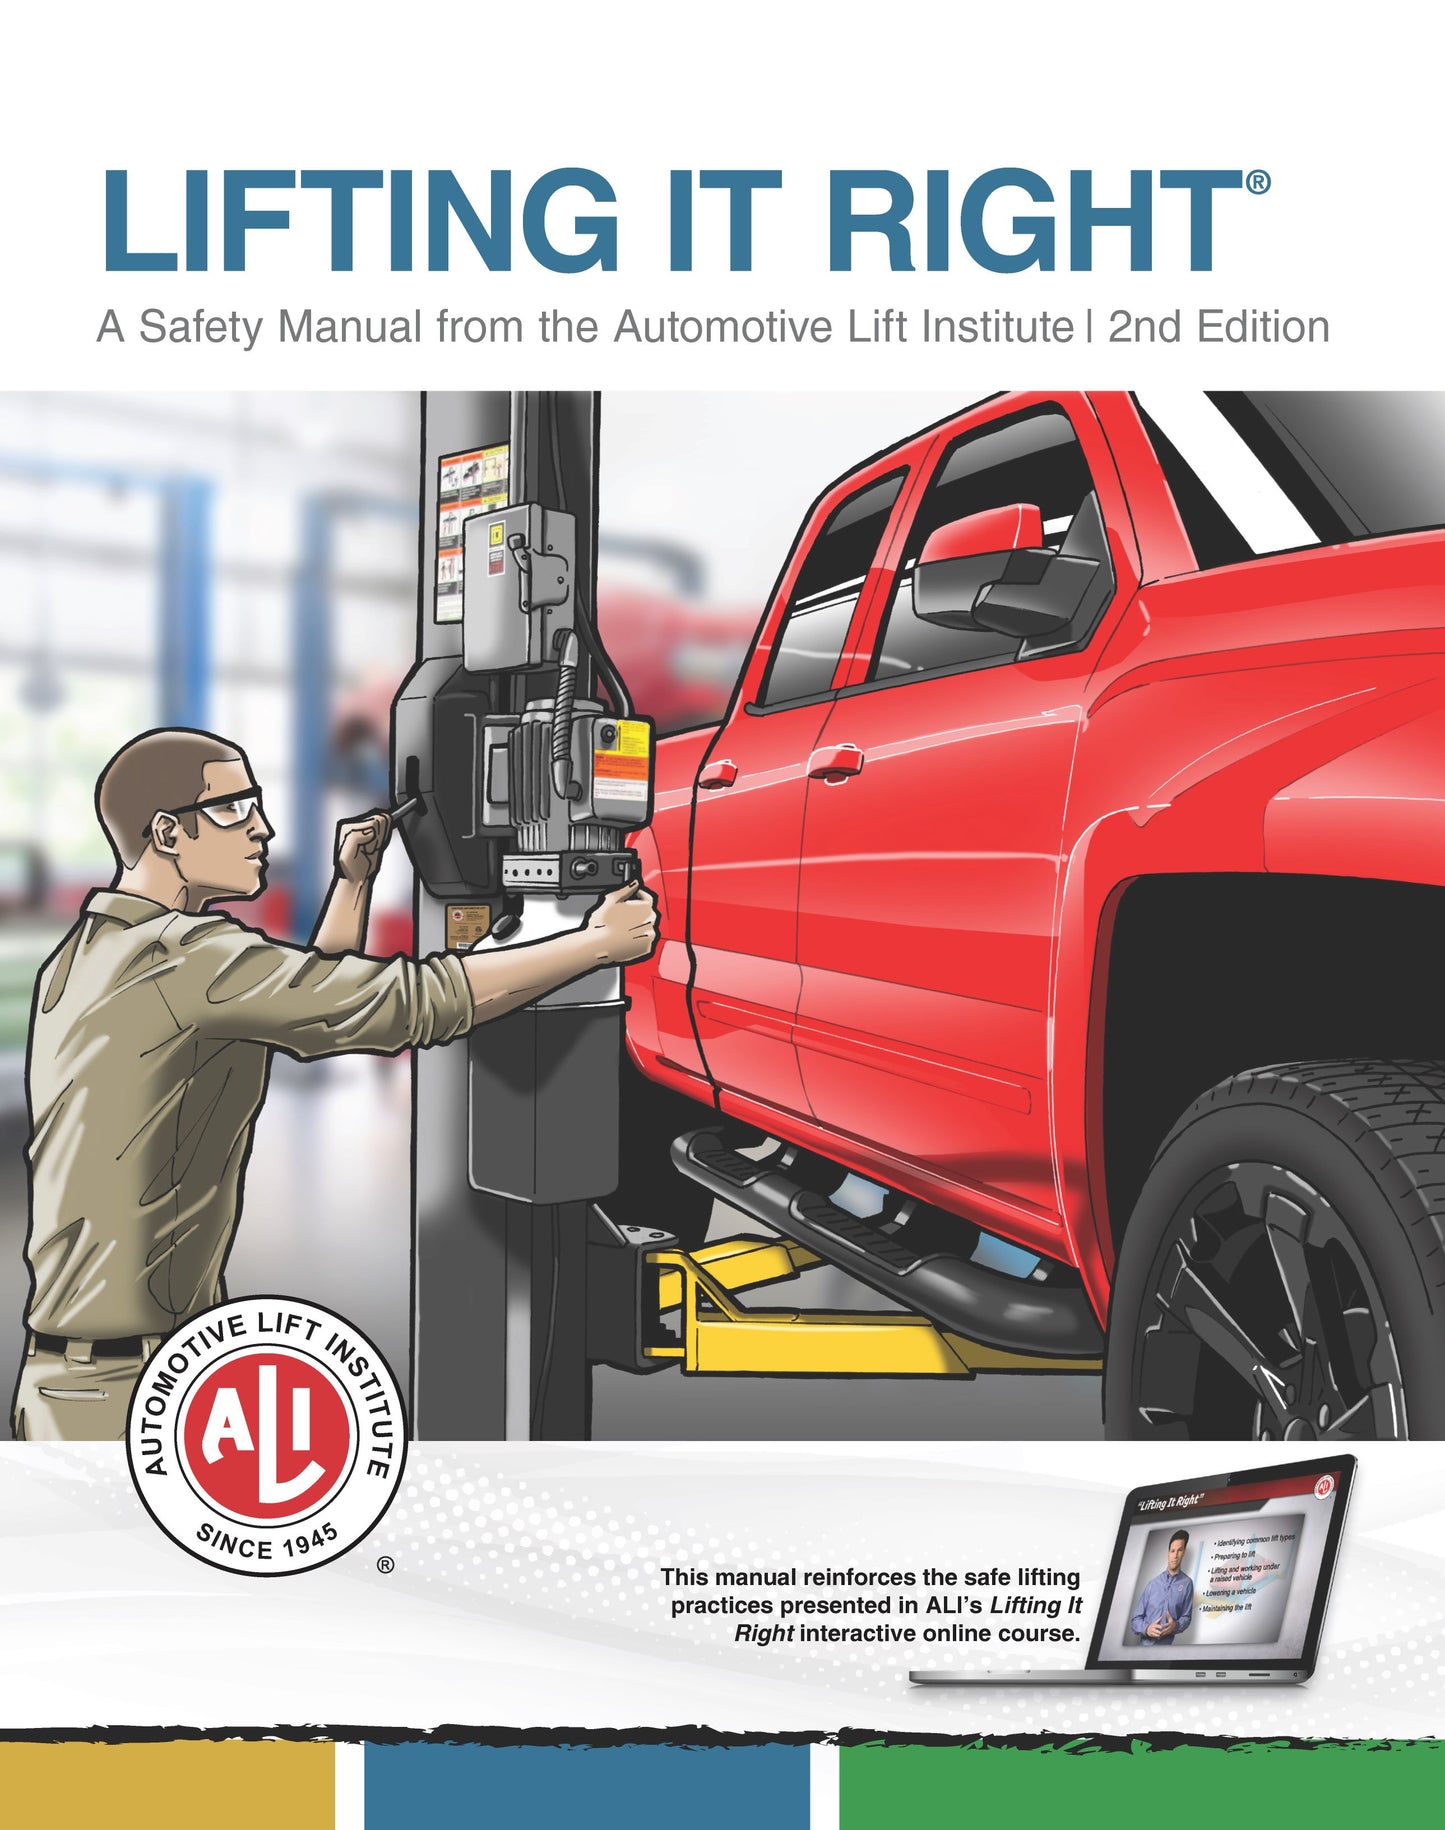 Automotive Lift Institute (ALI) "Lifting It Right" Safety Manual